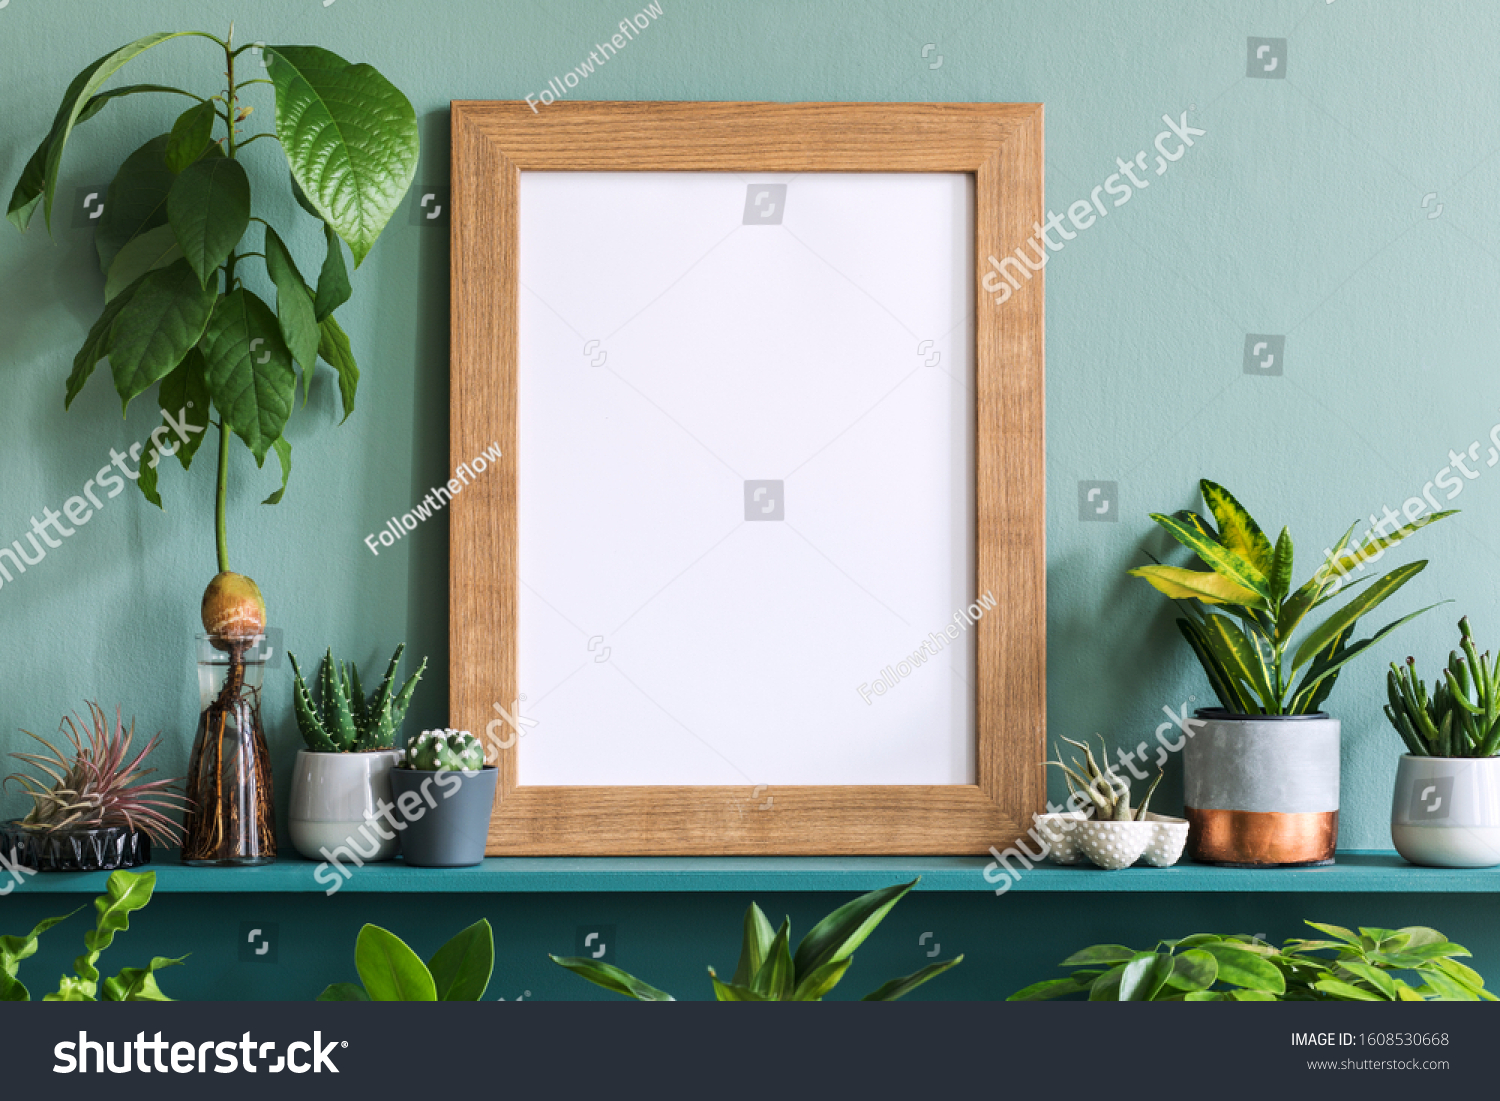 Interior design of living room with brown mock up photo frame on the green shelf with beautiful plants in different hipster and design pots. Elegant personal accessories. Home gardening. Template.  #1608530668